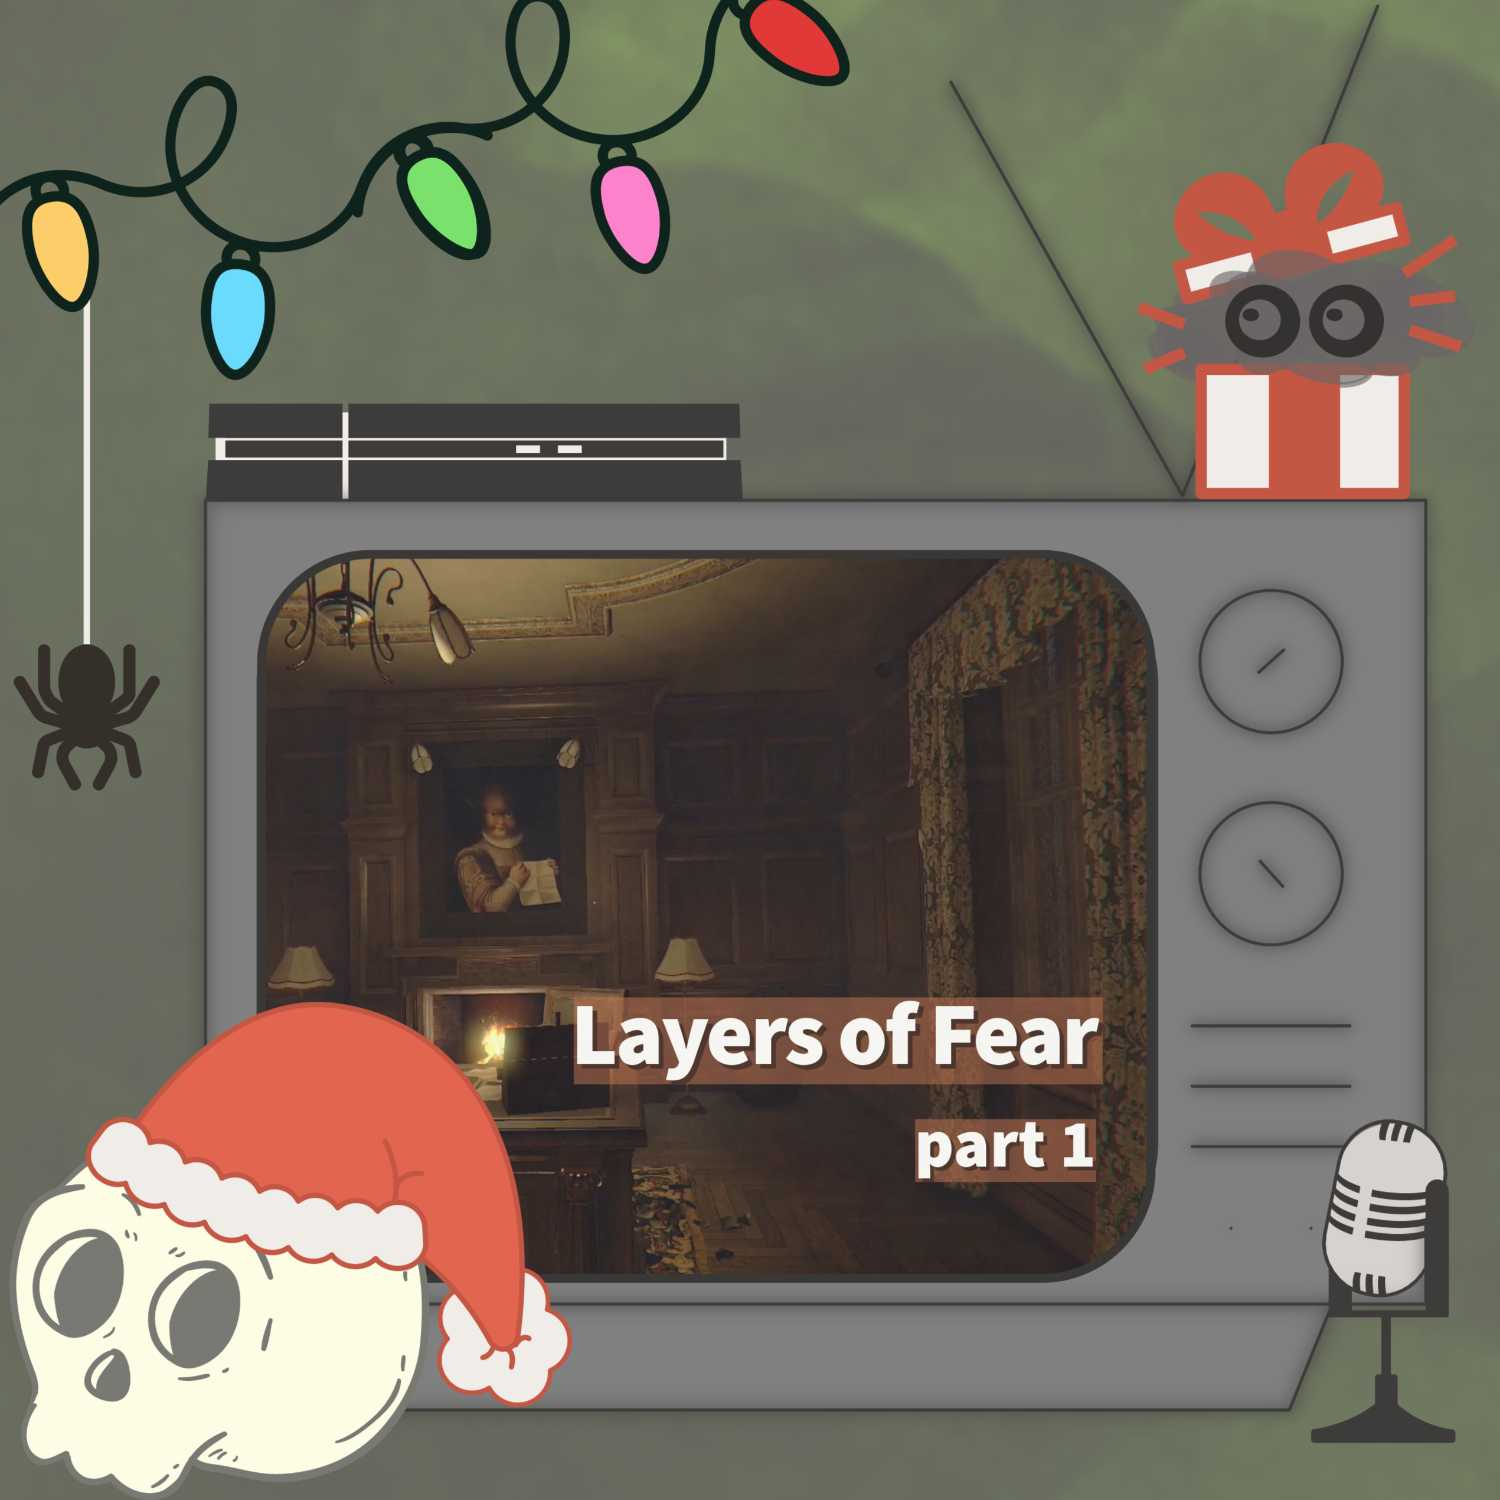 Say Snail Trail One More Time - Layers of Fear - Scerry Christmas Part 1